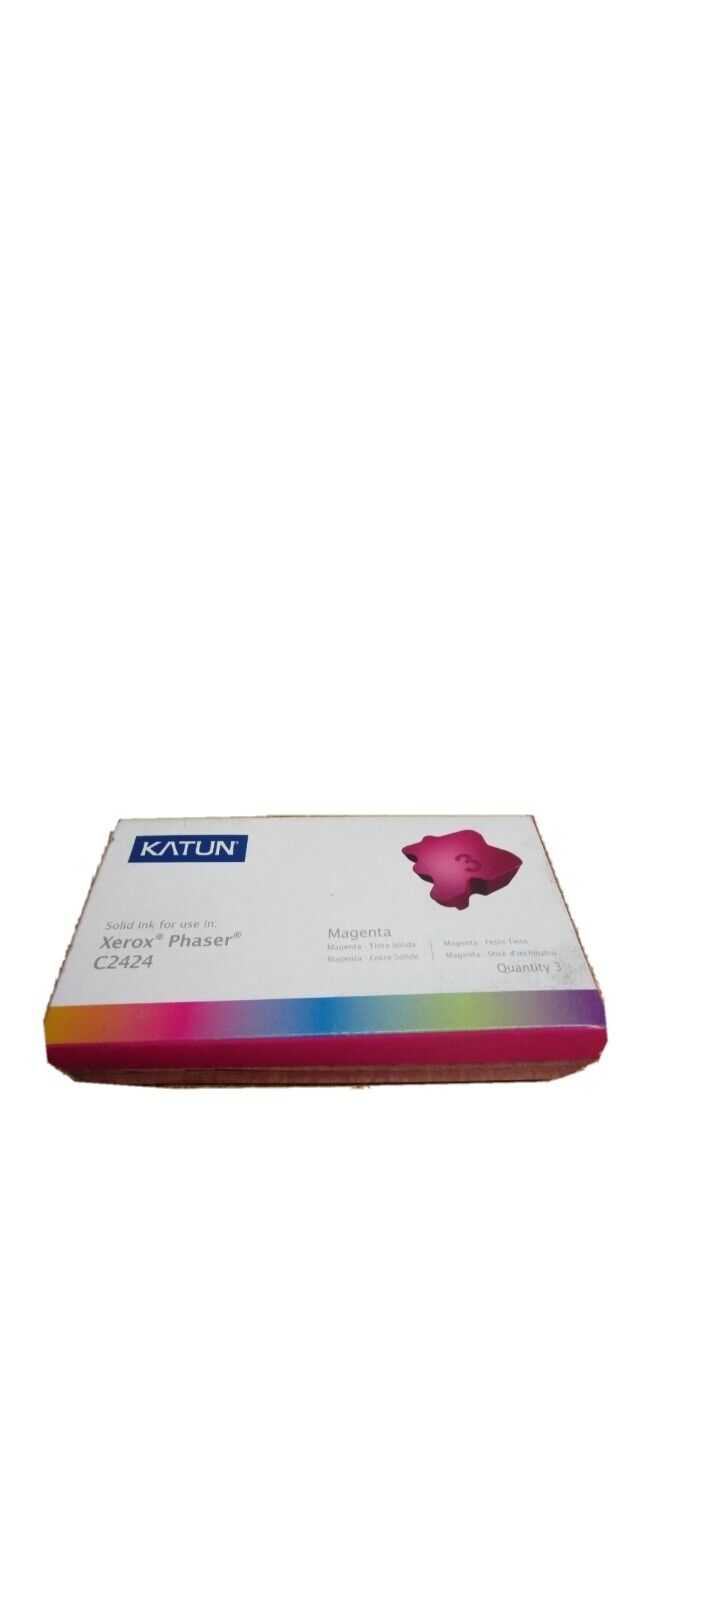 Katun 37976 For Xerox Solid Ink WorkCentre C2424 3 Magenta New Sealed Box